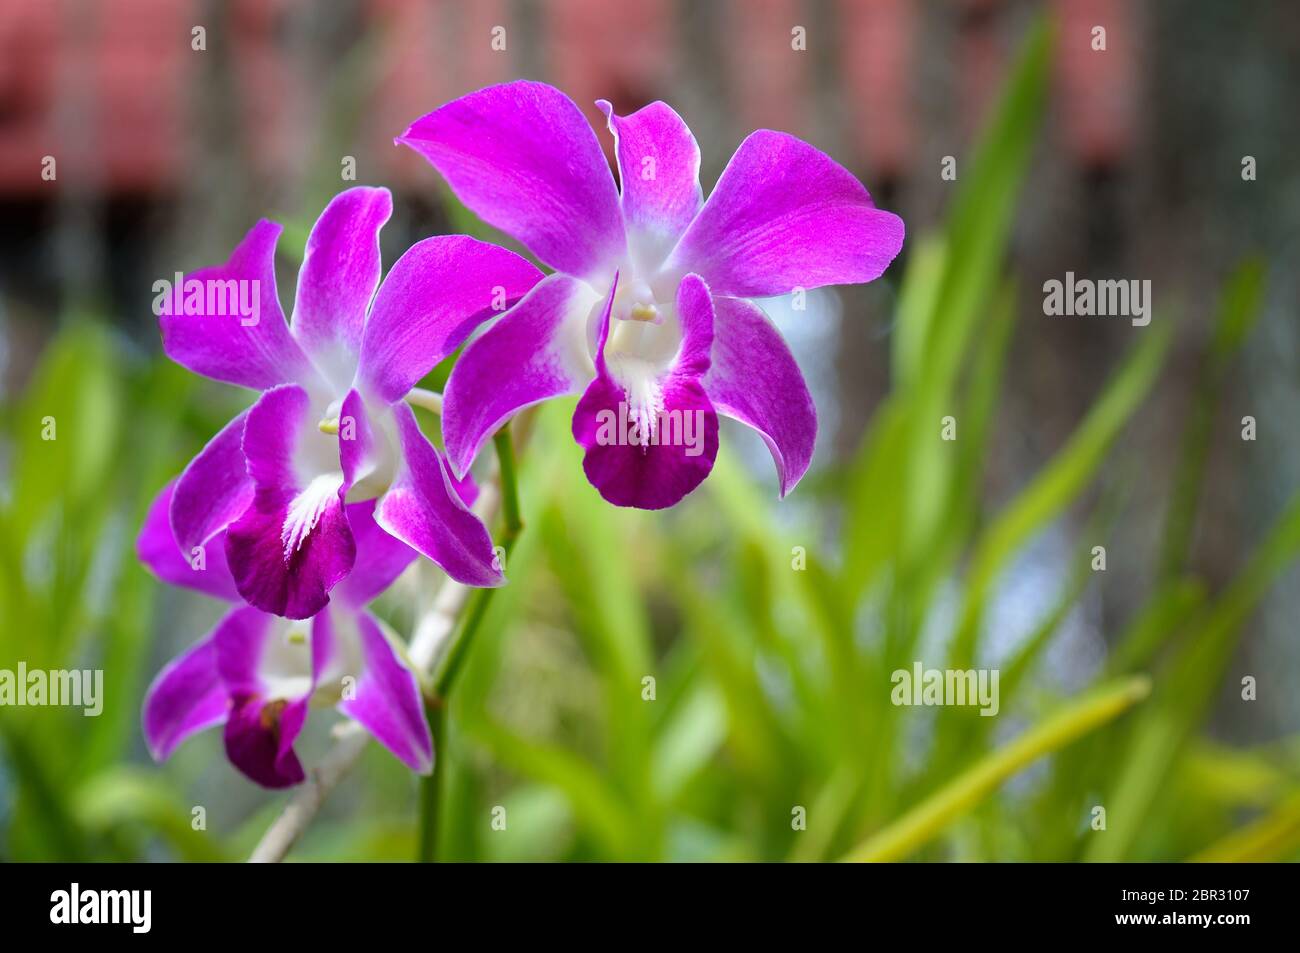 Image of beautiful purple orchid flowers in the garden. Floral background.Selective focus. Stock Photo